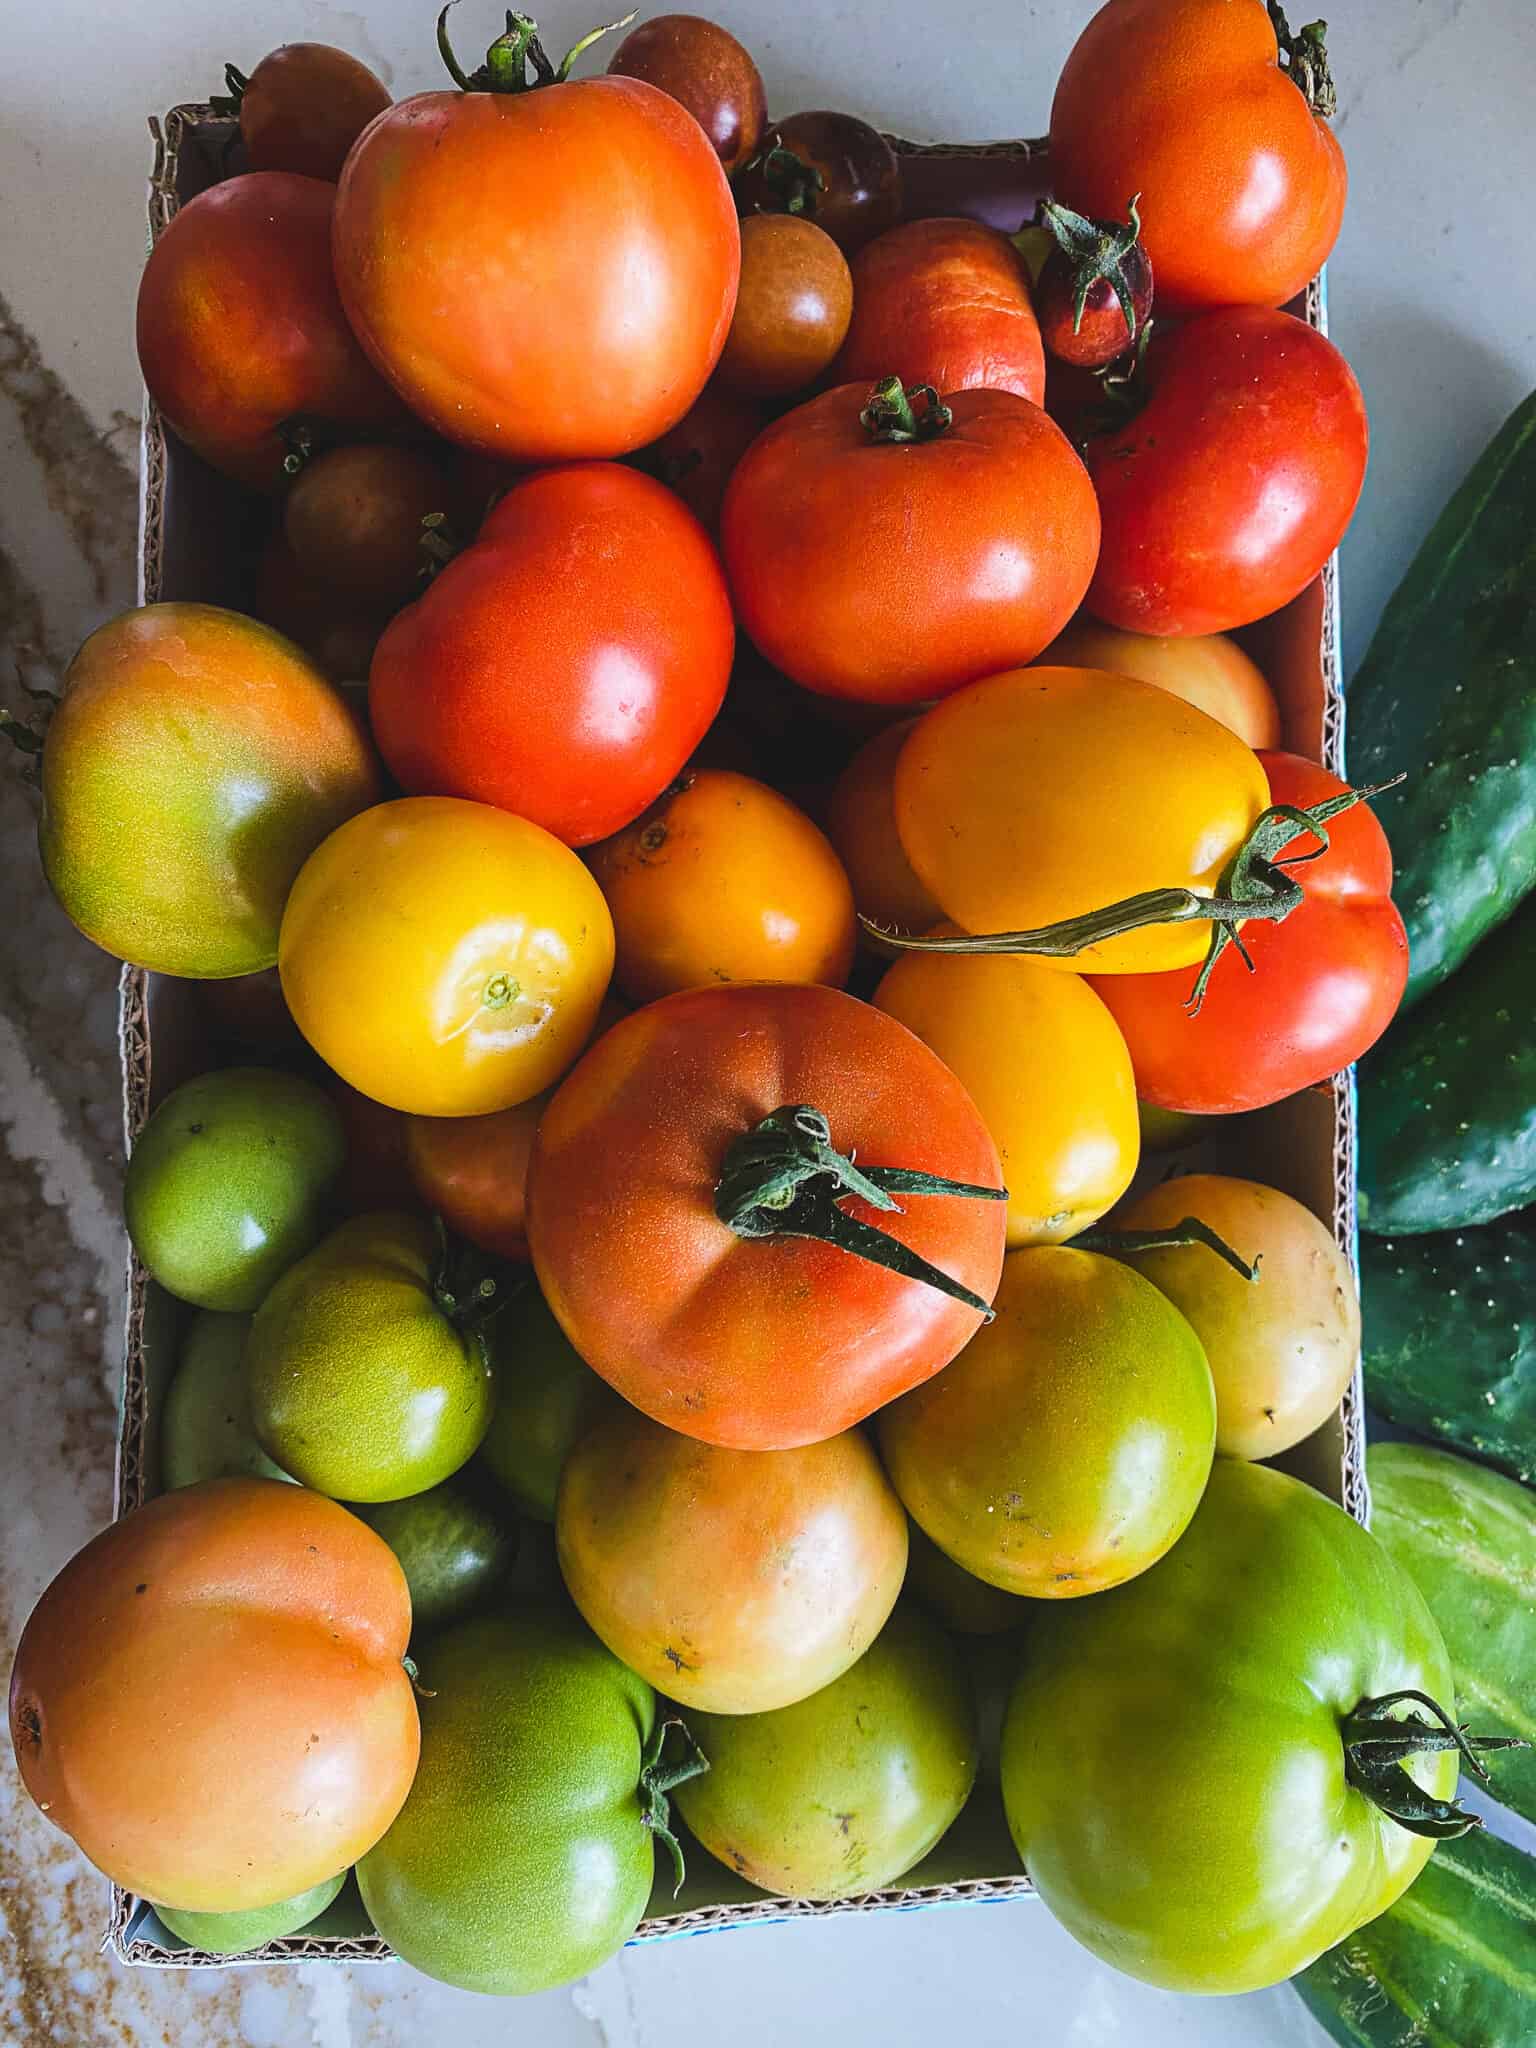 A box full of tomatoes including green, yellow, orange, and red tomatoes.